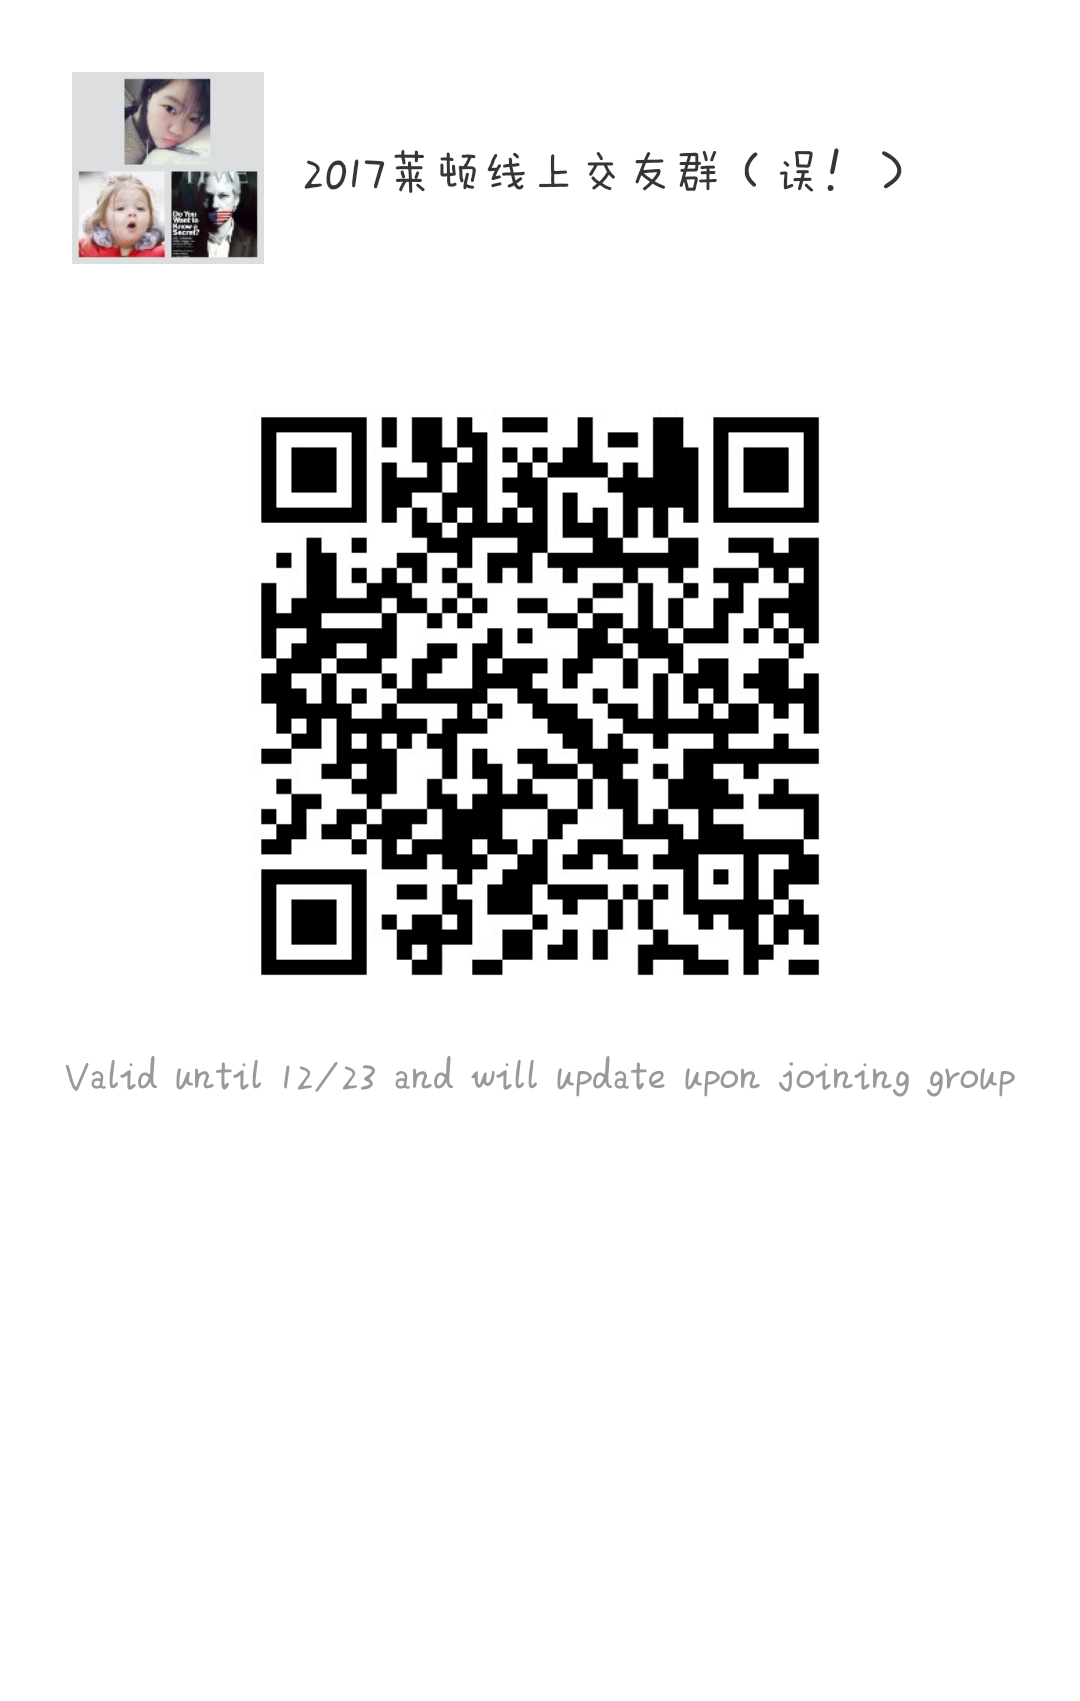 mmqrcode1481862514747.png